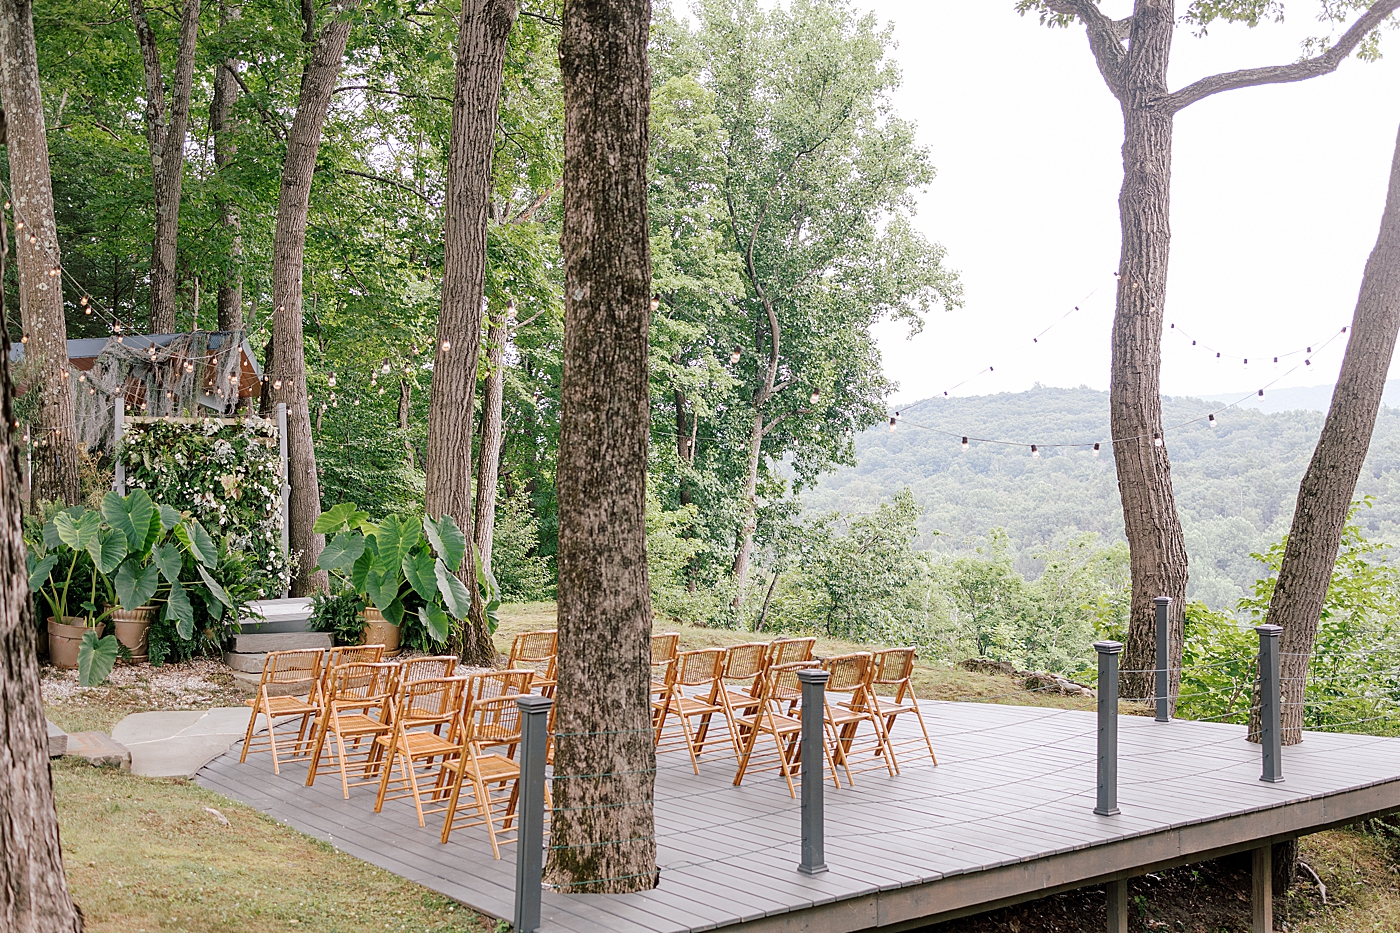 Ceremony location during Promise Ridge Wedding | Image by Hope Helmuth Photography 